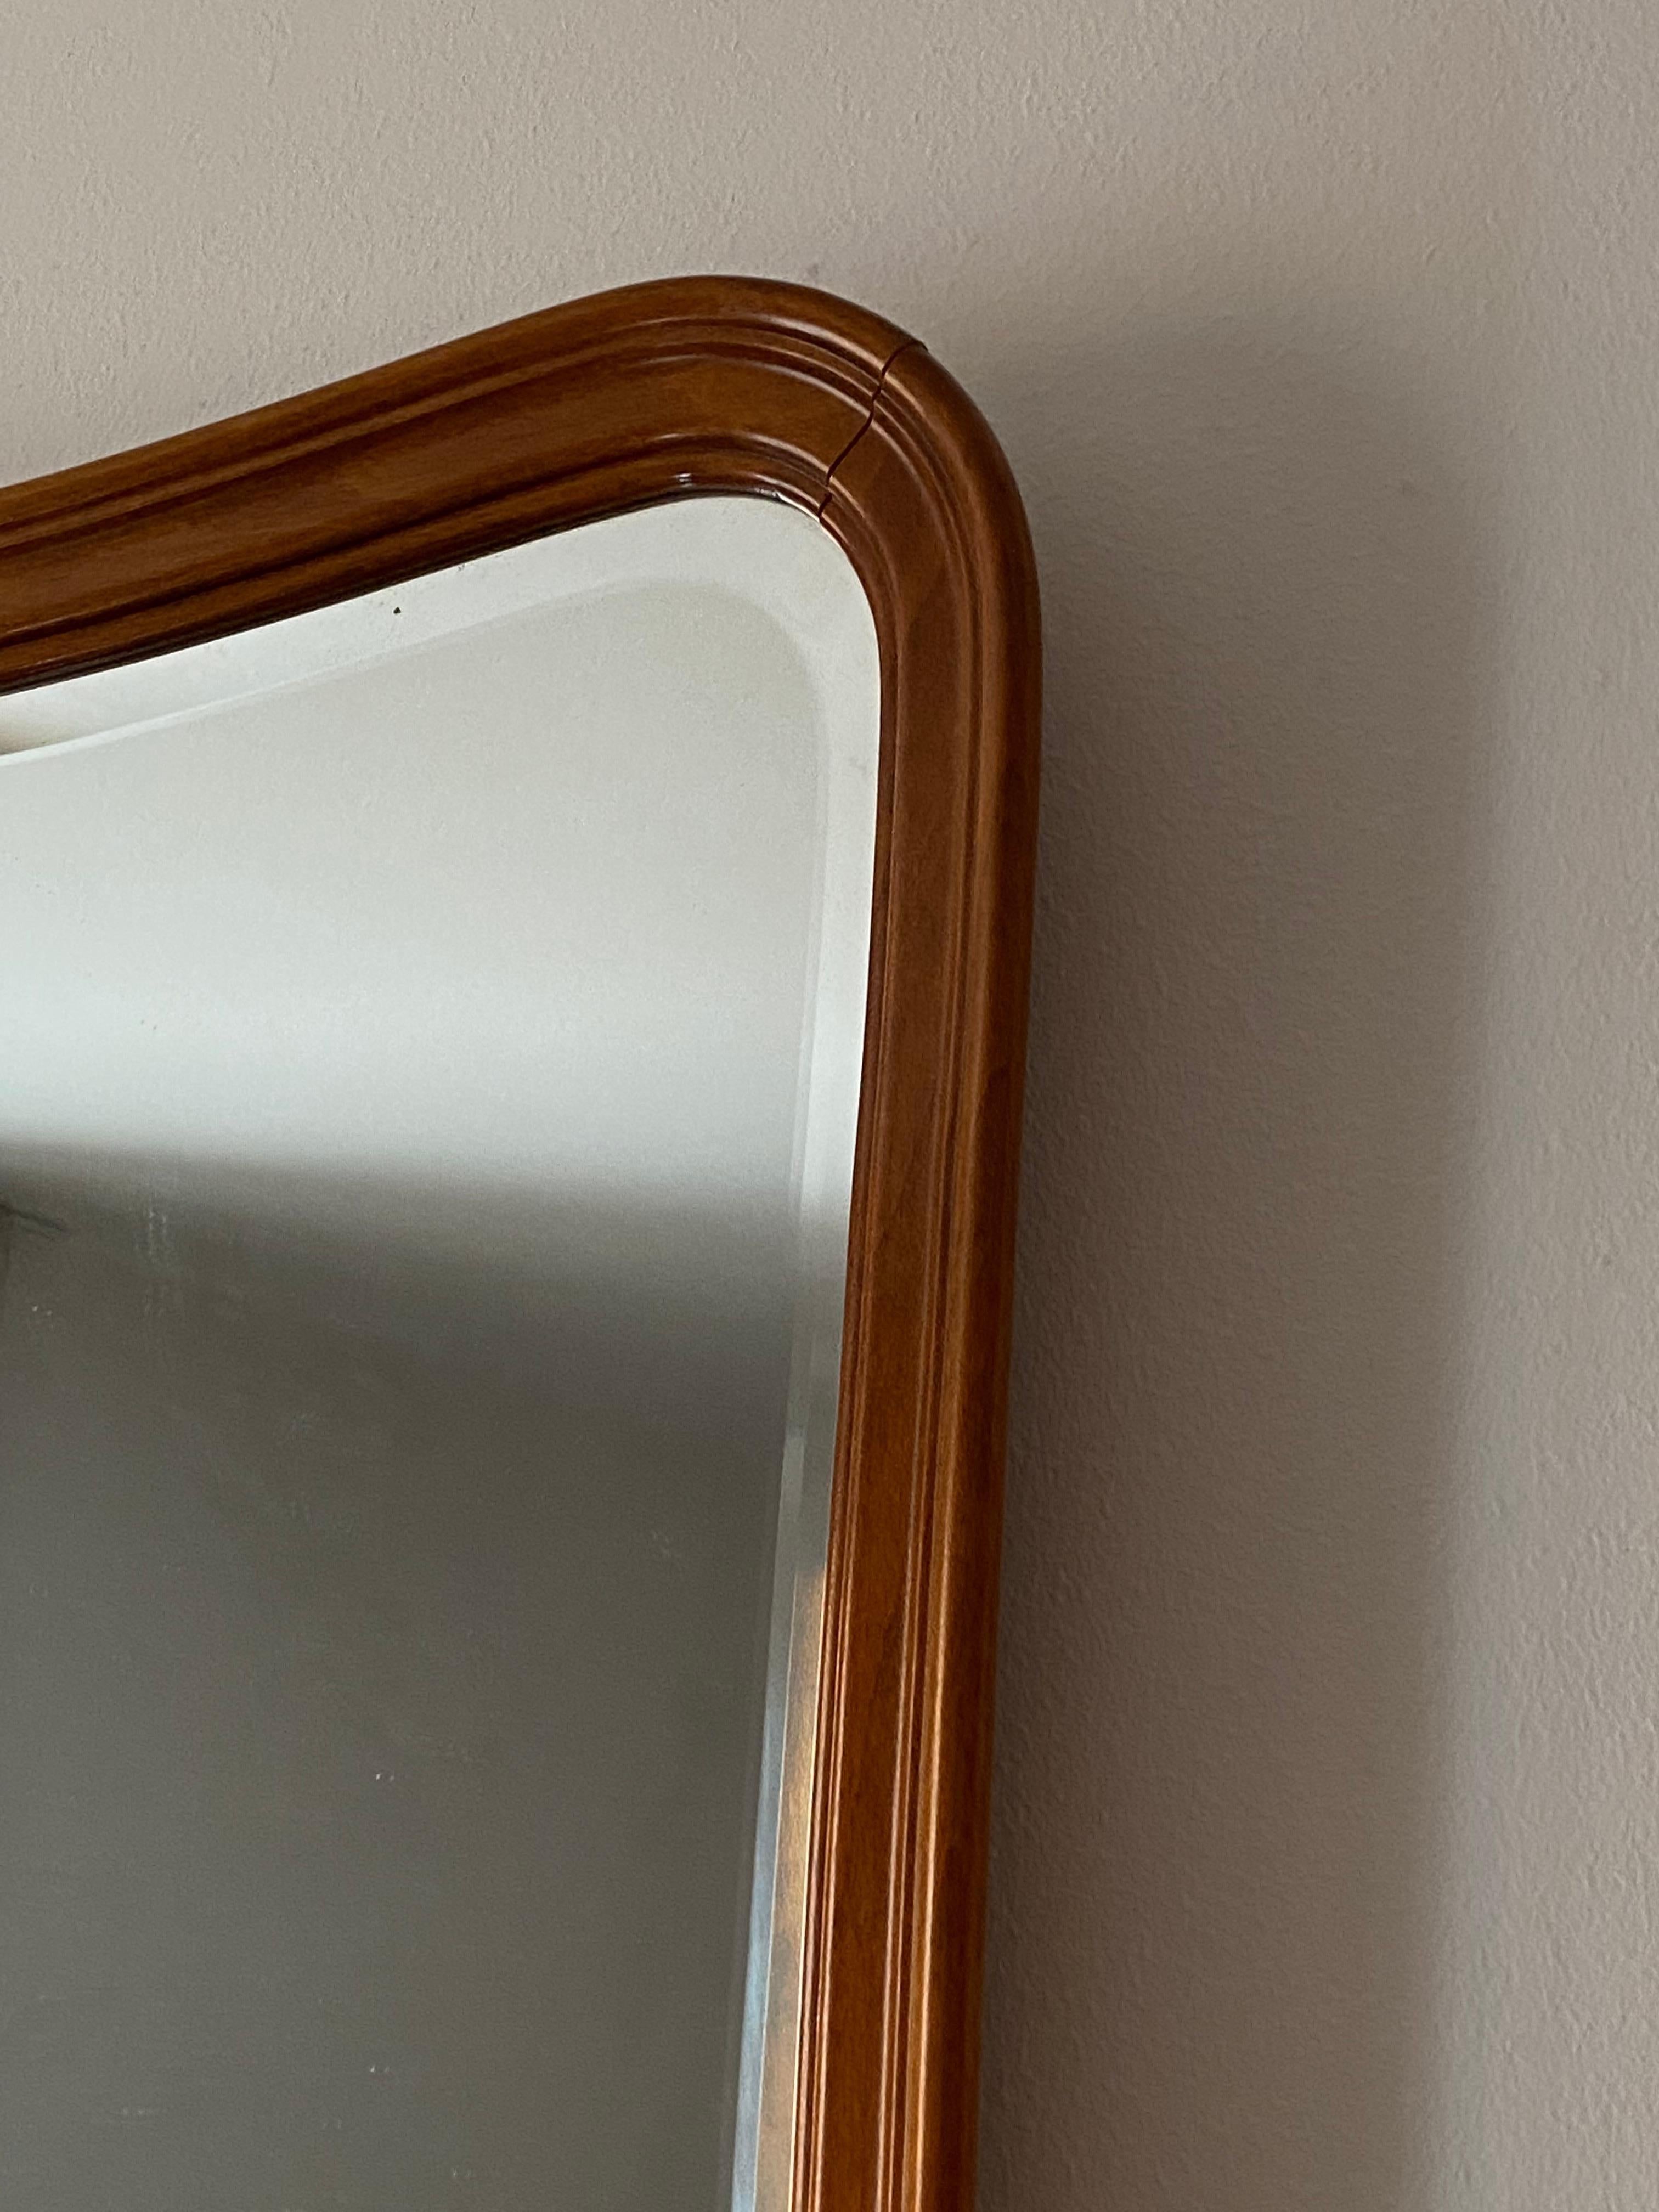 An organic wall mirror. Designed and produced in Sweden, c. 1950s. Features finely ornamented carved wood, and it's original mirror glass.

Other designers of the period include Paolo Buffa, Fontana Arte, Jean Royère, Josef Frank, and Gio Ponti.